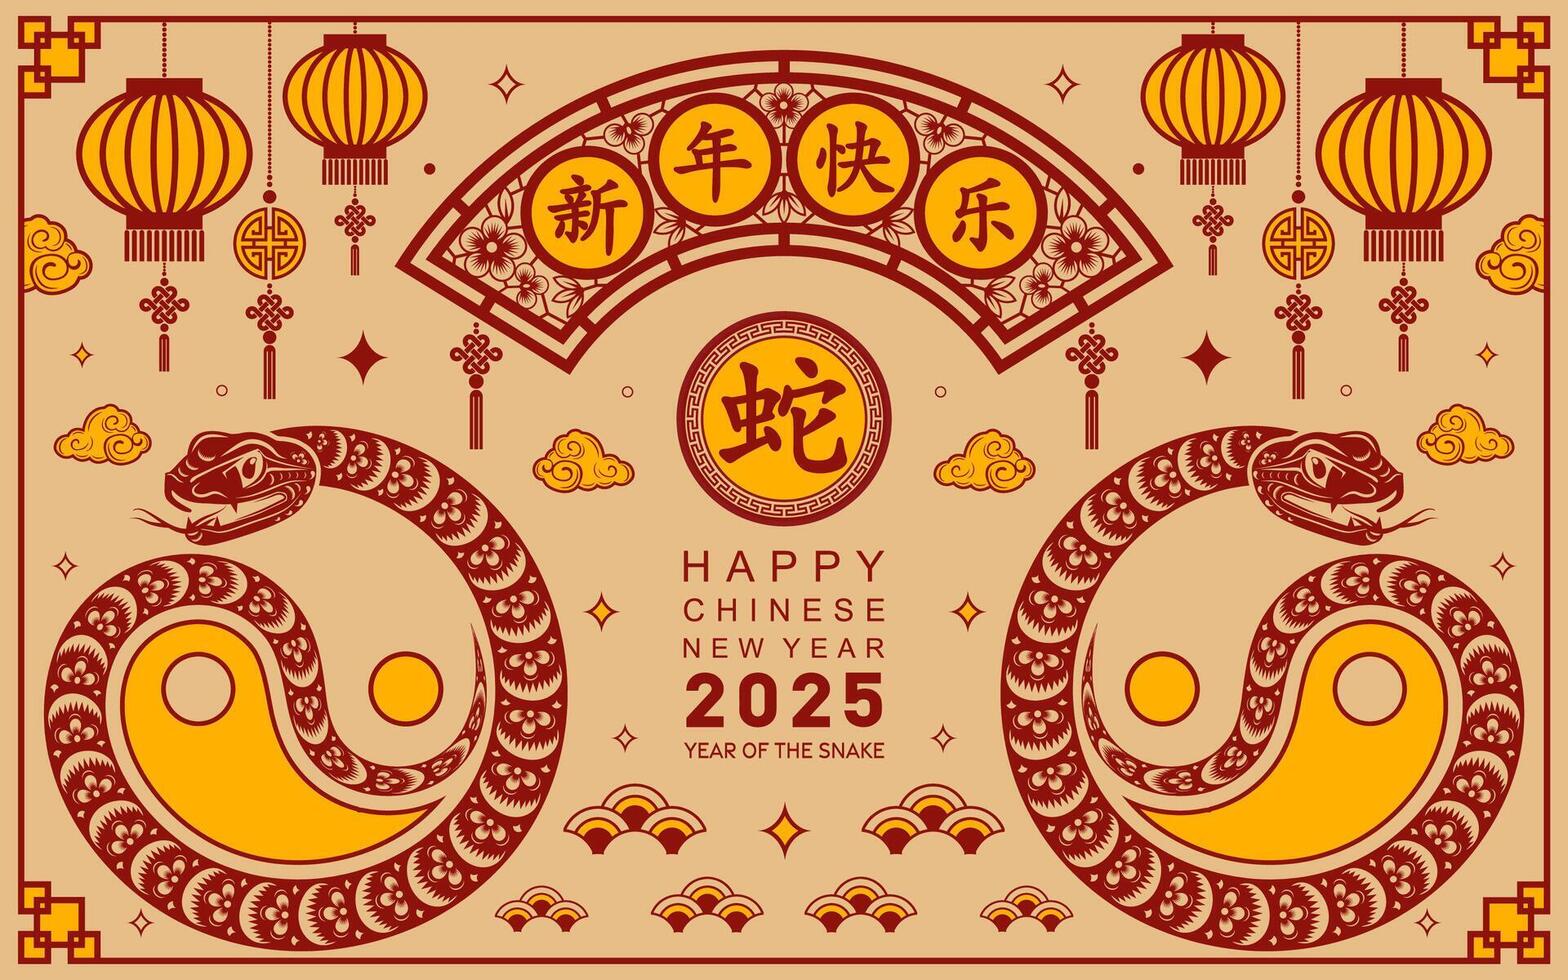 Happy chinese new year 2025 the snake zodiac sign with flower,lantern,asian elements paper cut style on color background. vector